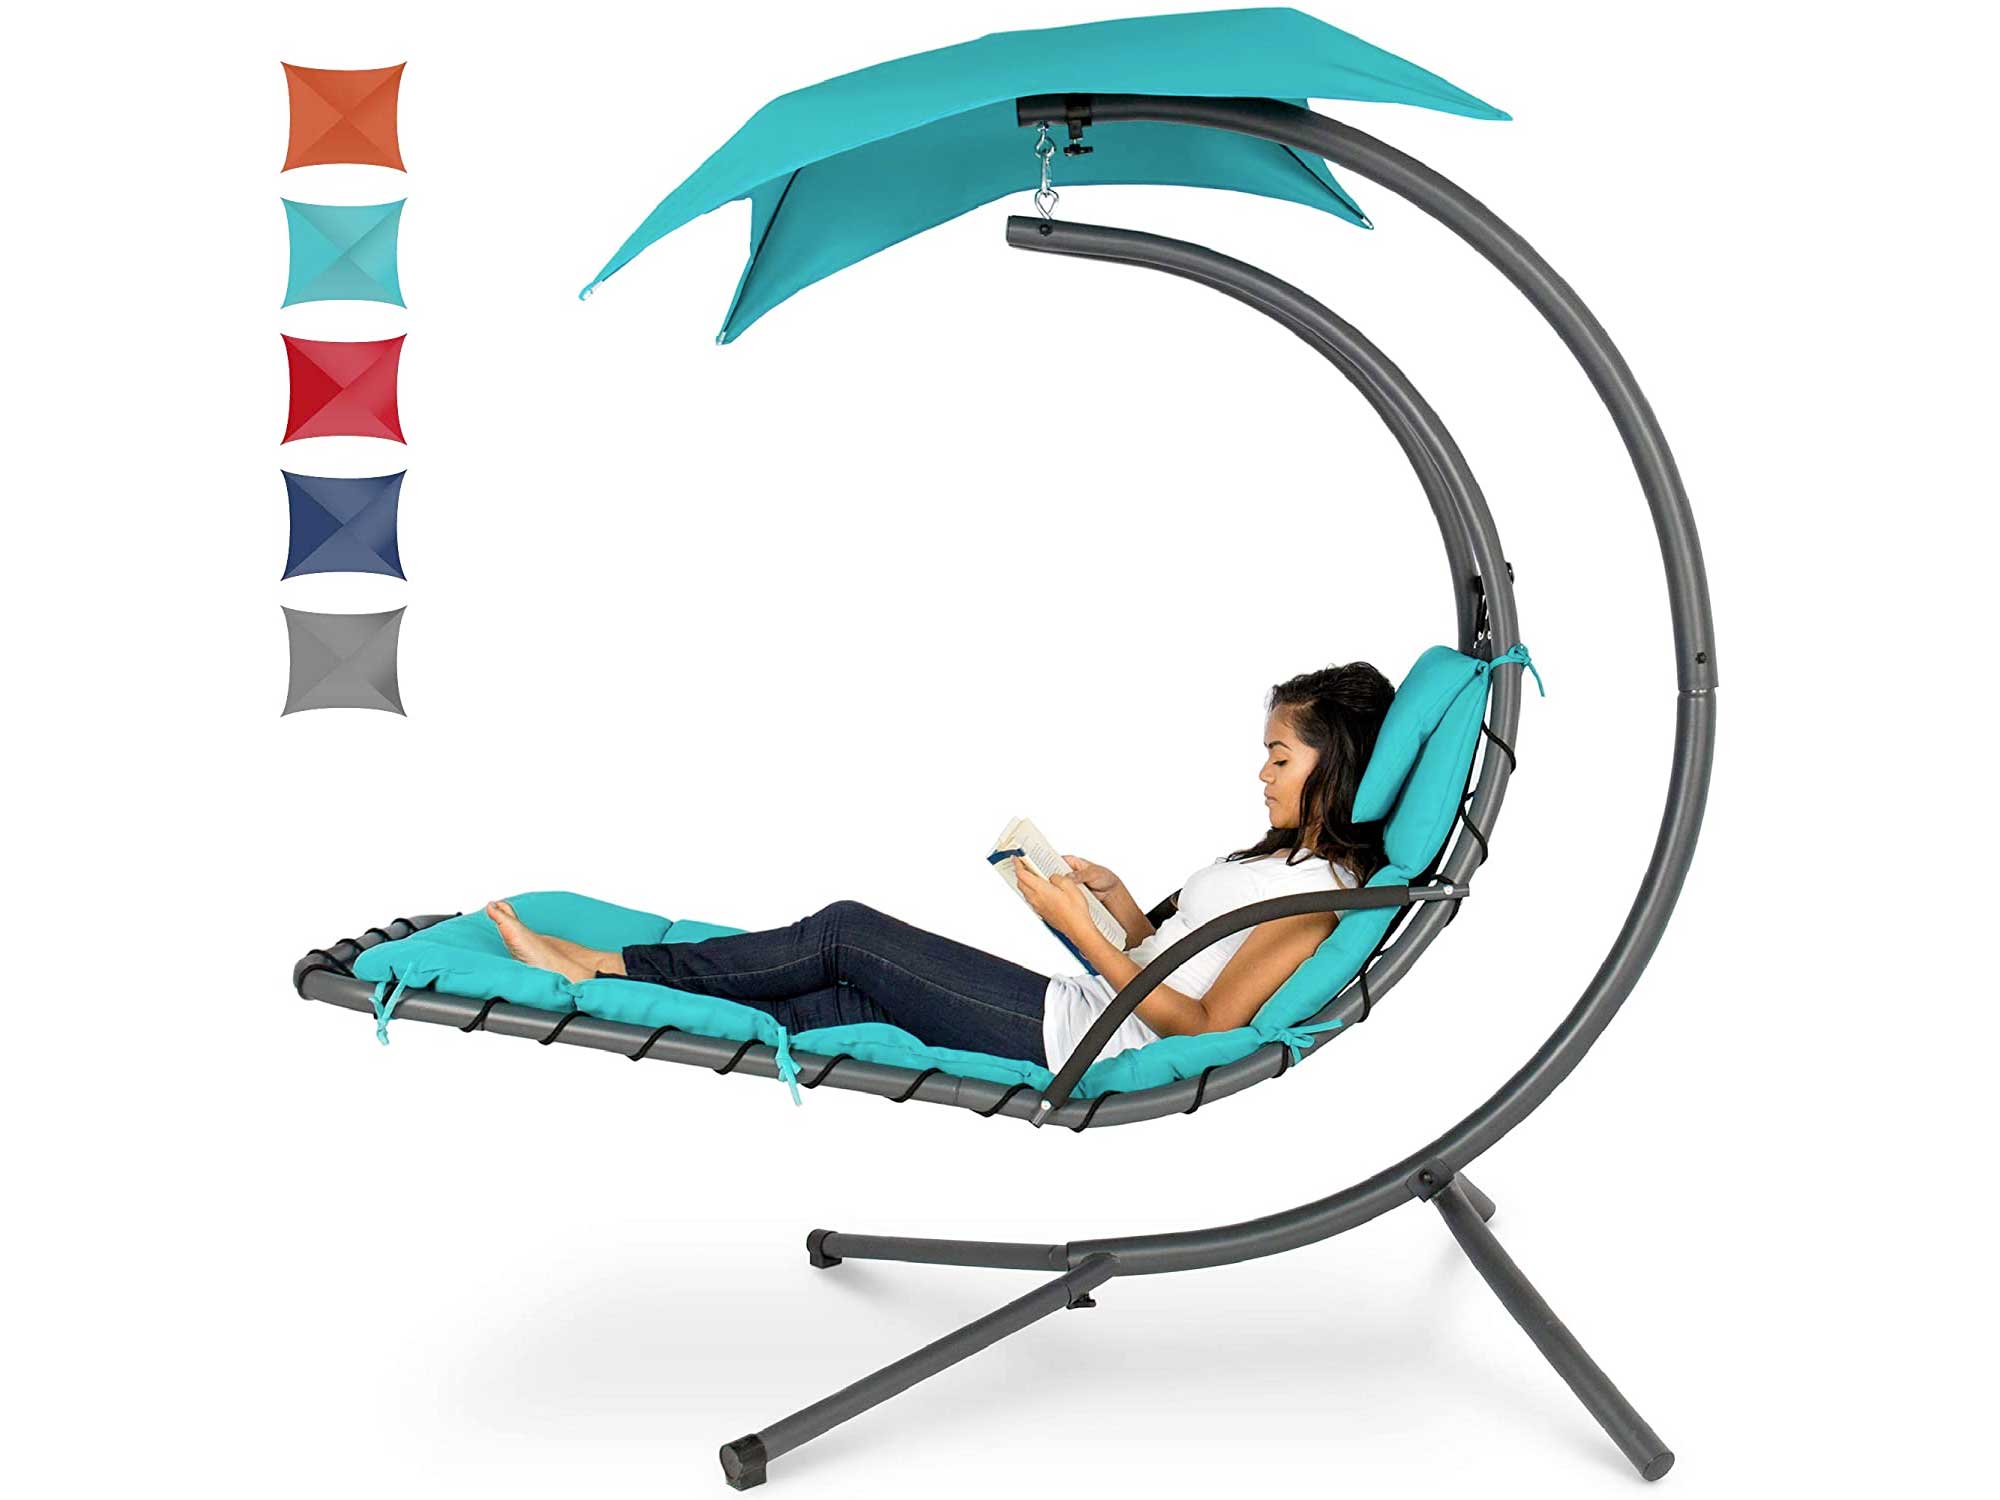 Lounging in comfort thanks to the Best Choice chaise lounge